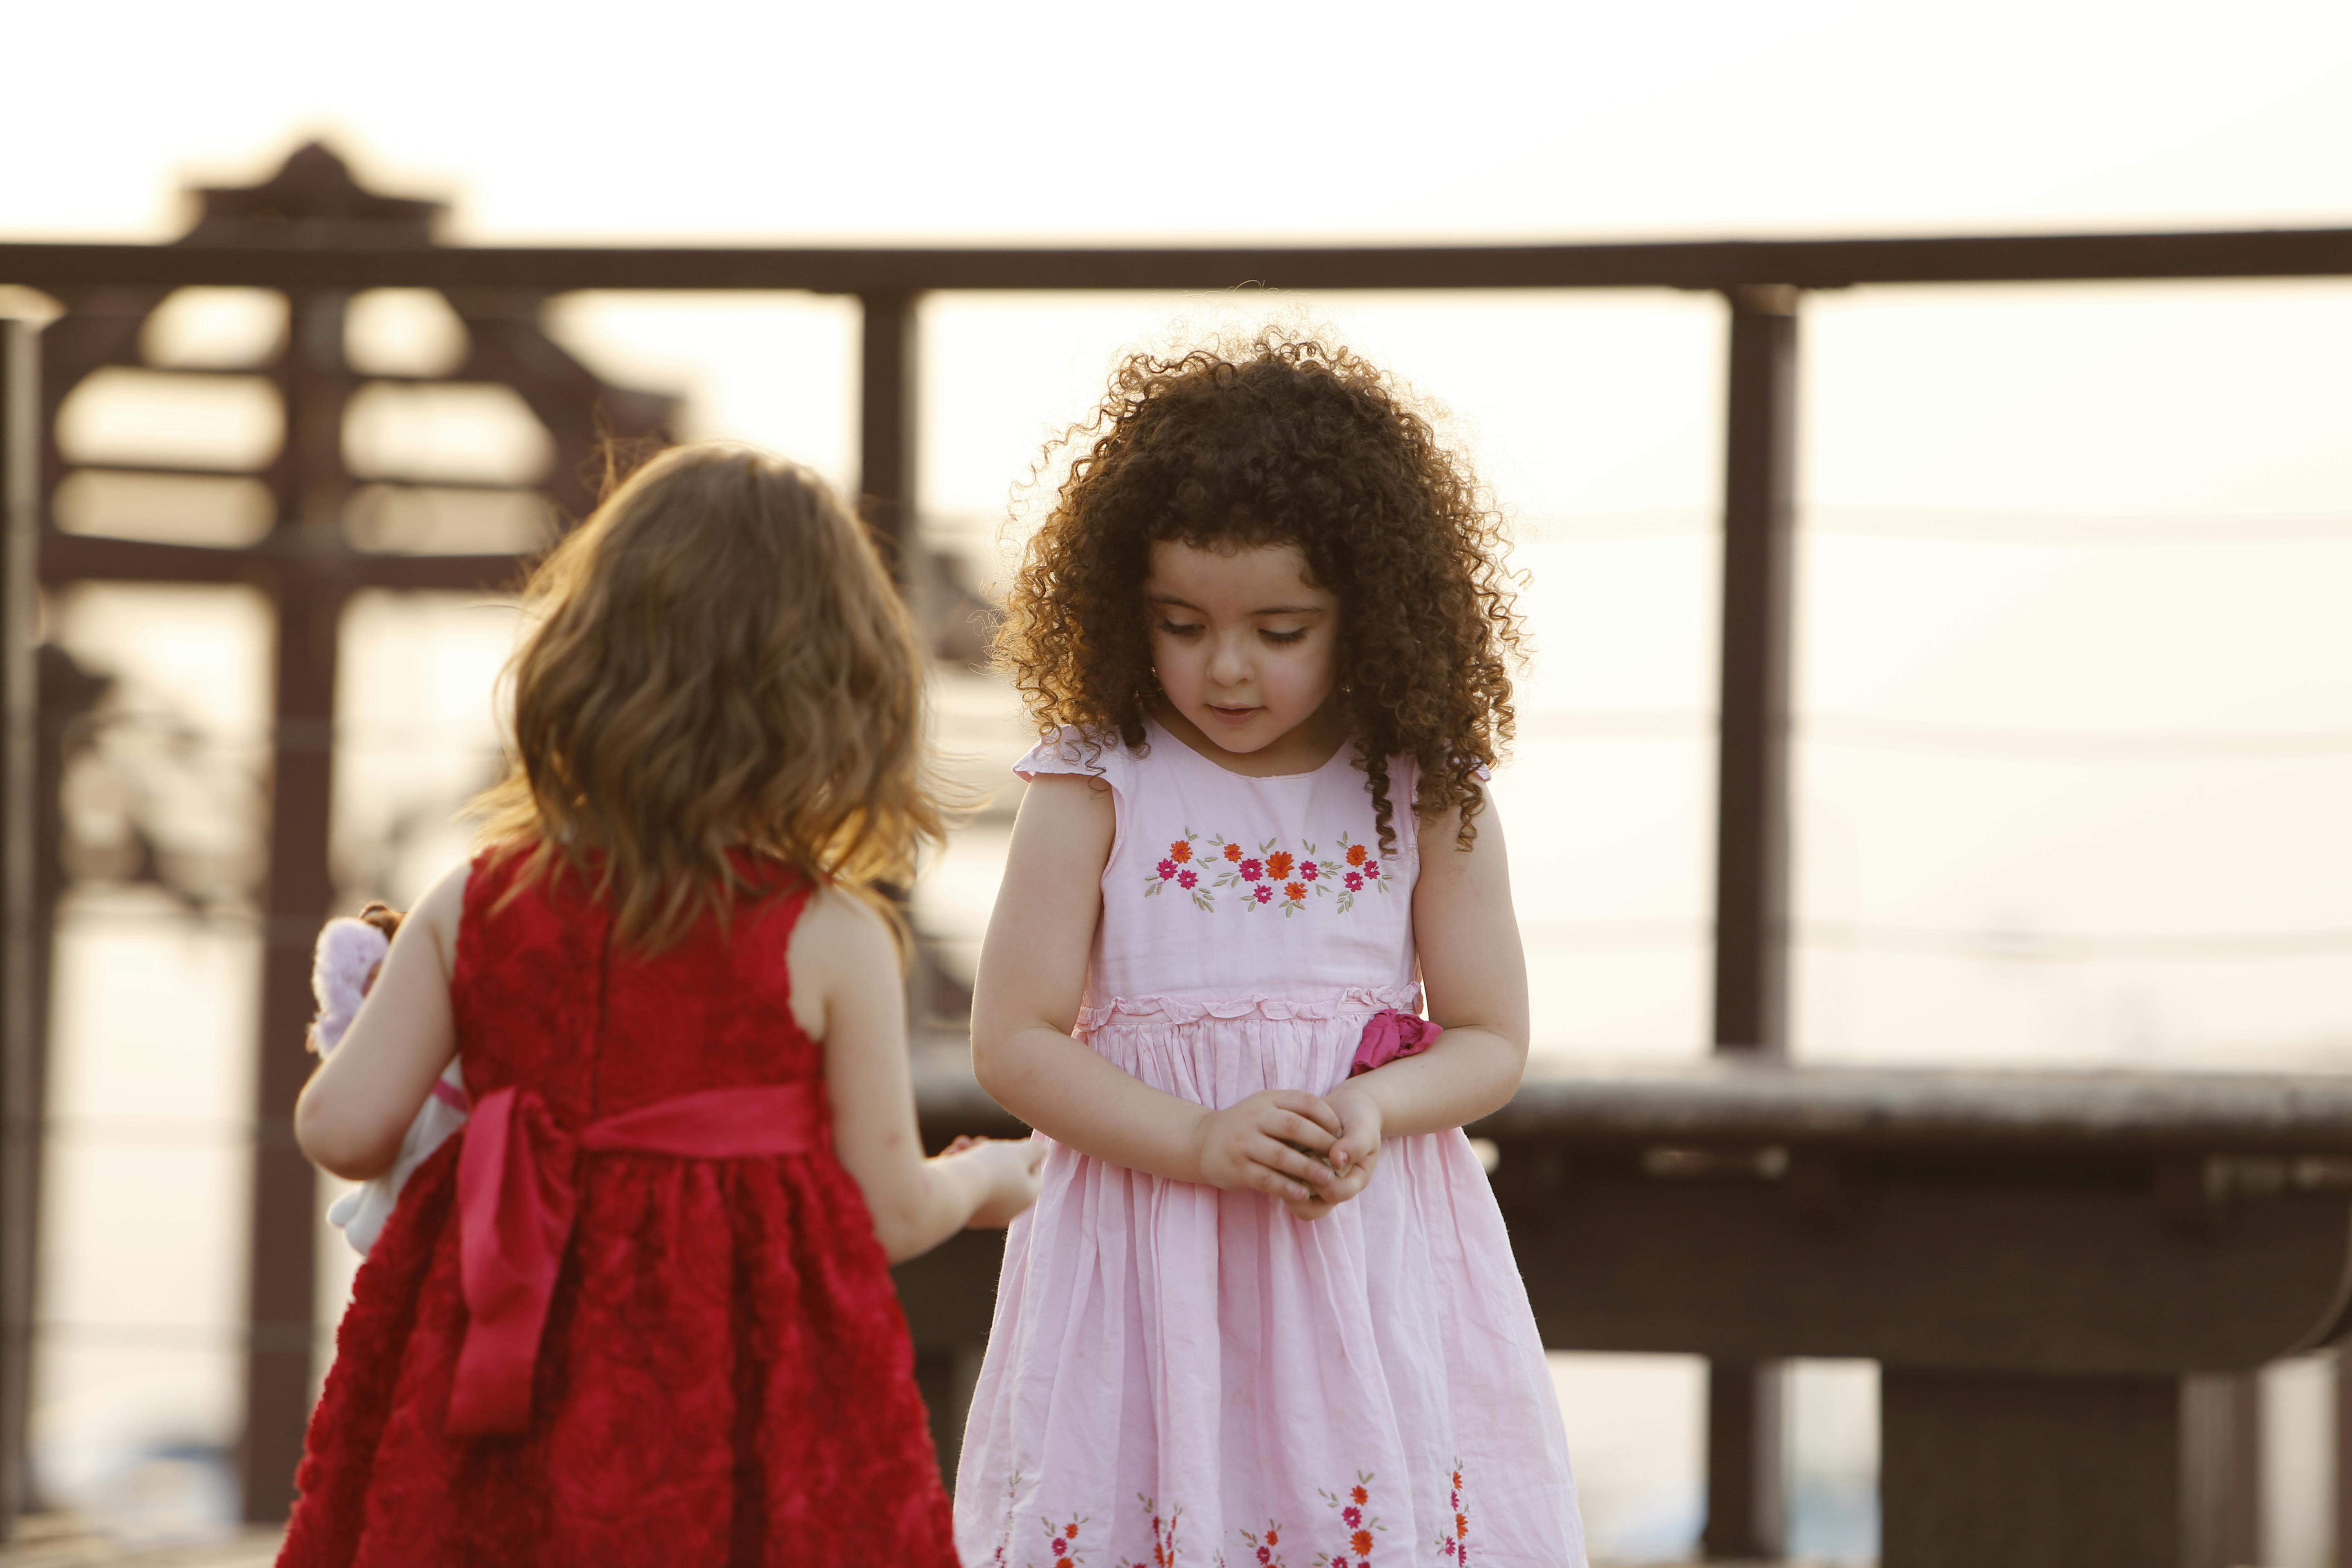 Two Little Girls in Pink and Red Dresses · Free Stock Photo